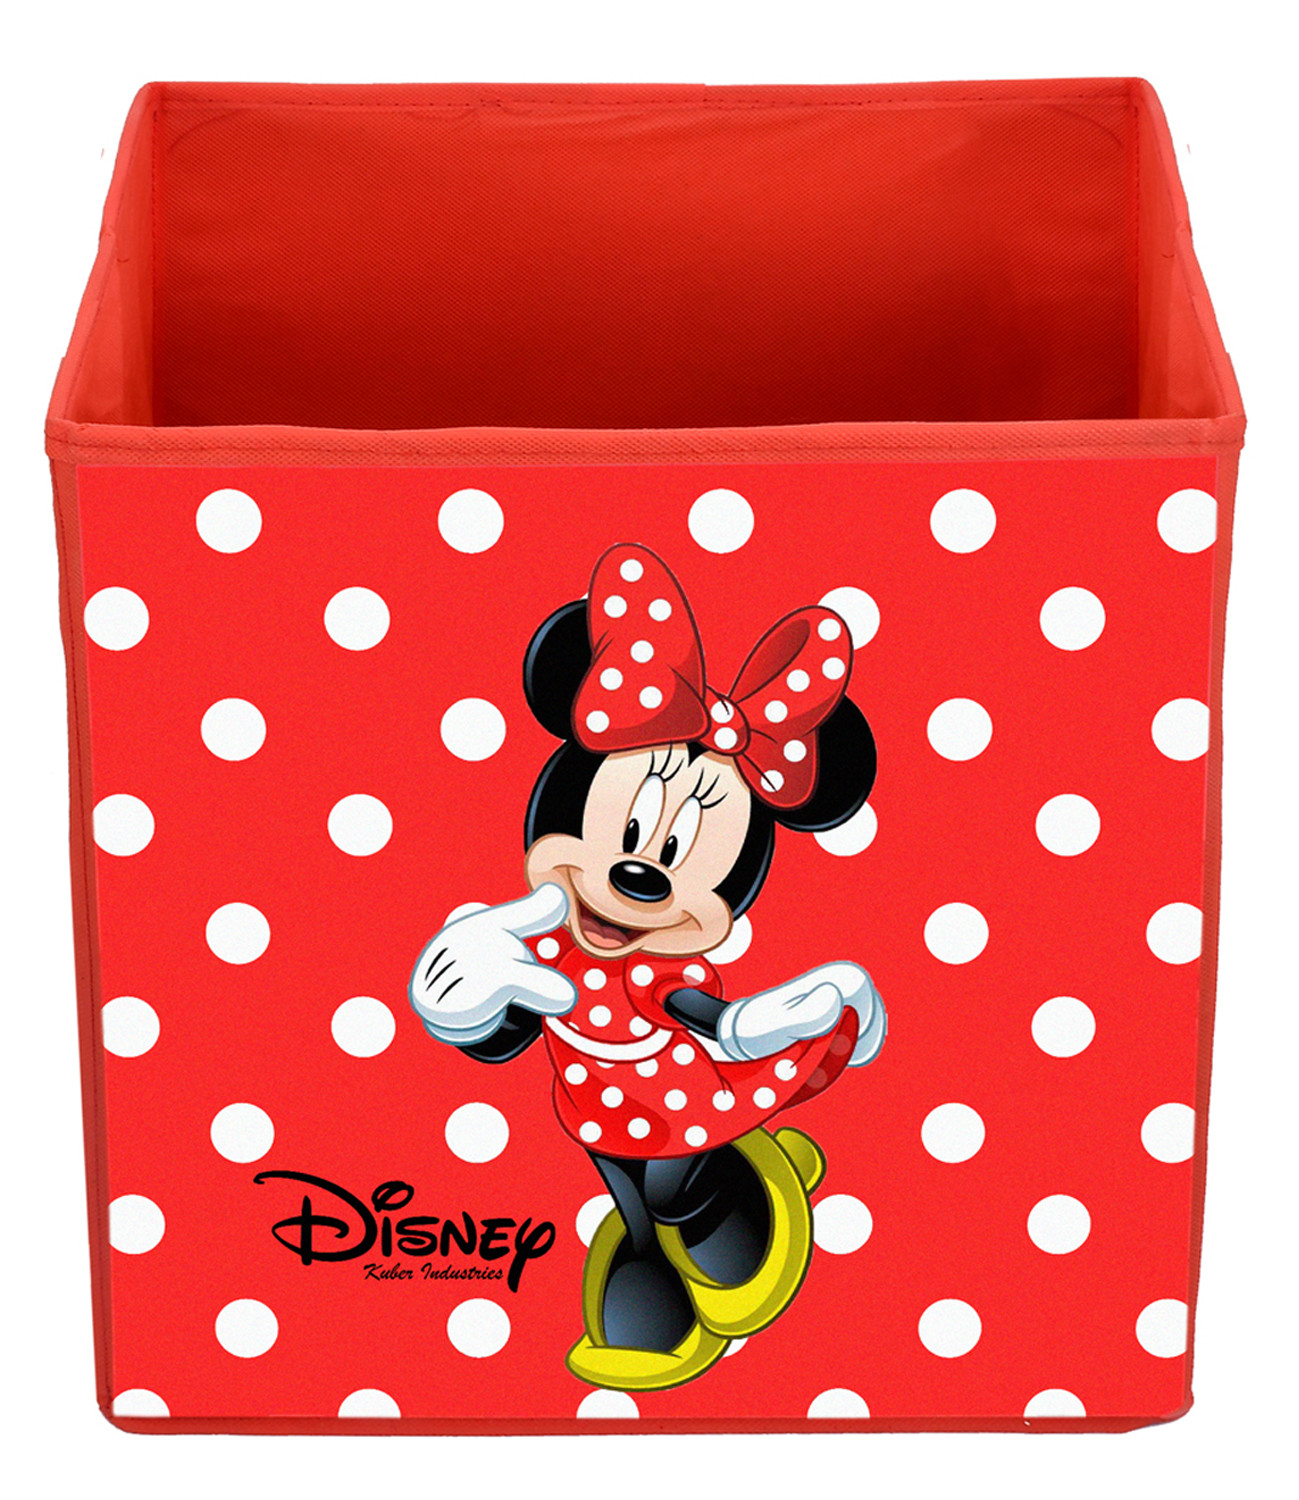 Kuber Industries Disney Print Non Woven Fabric Foldable Large Size Storage Cube Toy,Books,Shoes Storage Box With Handle (Red,Maroon & Brown)